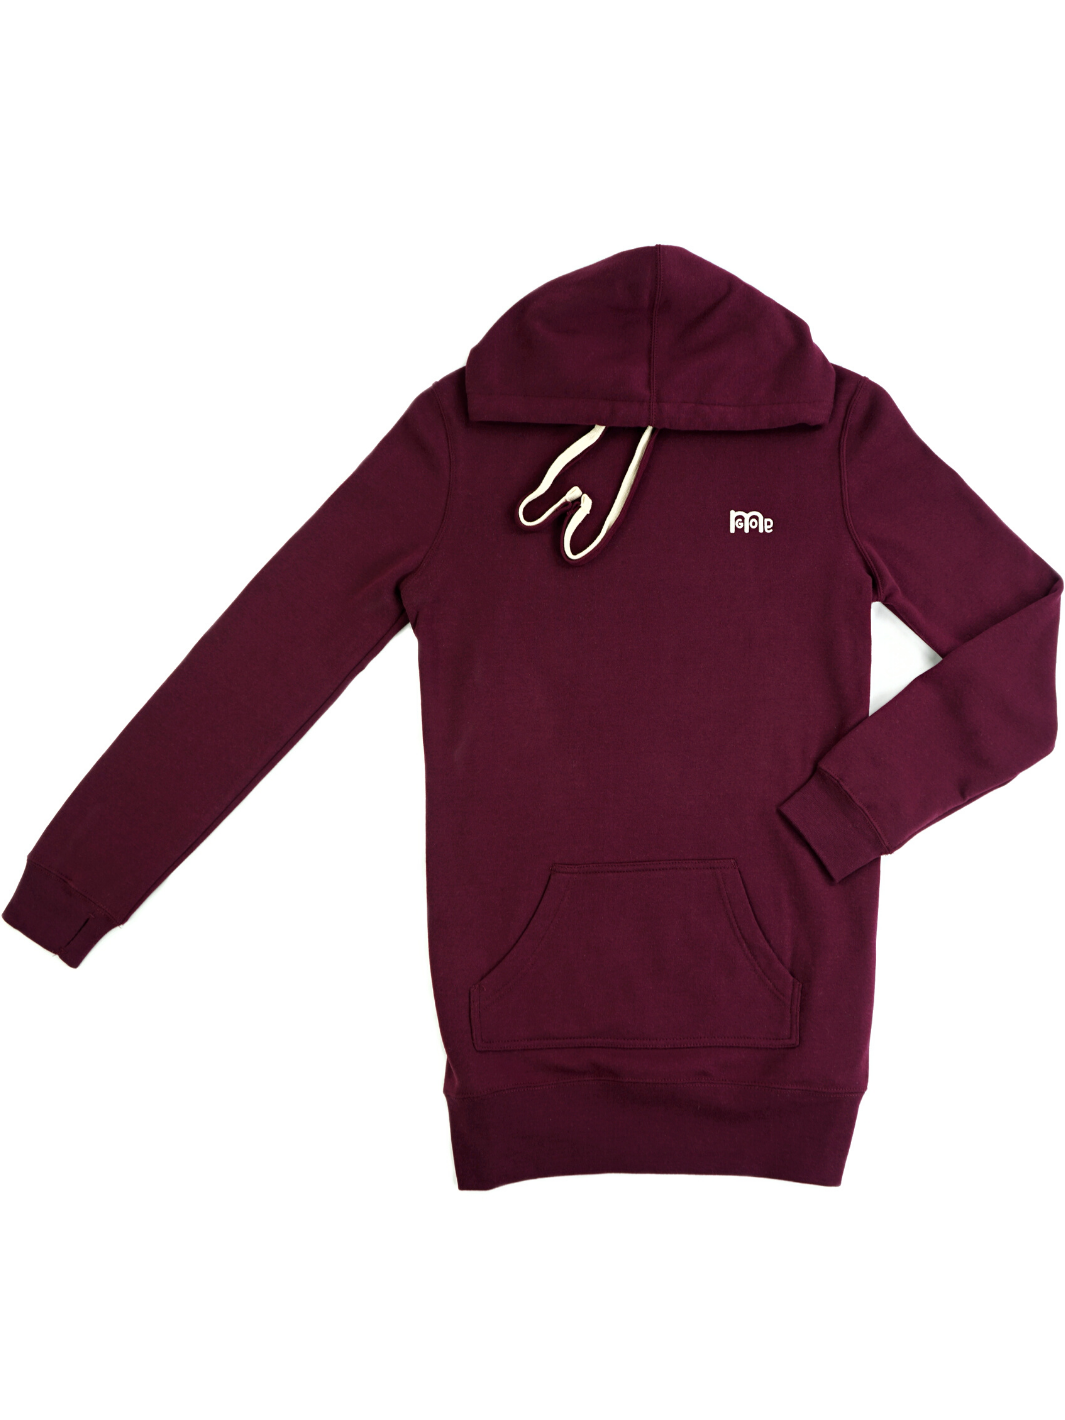 Burgundy GODinme Hoodie Dress made with superior quality of luxurious materials: Featuring our signature creme embroidered GODinme logo, two drawcords, and thumb hole cuff sleeves.